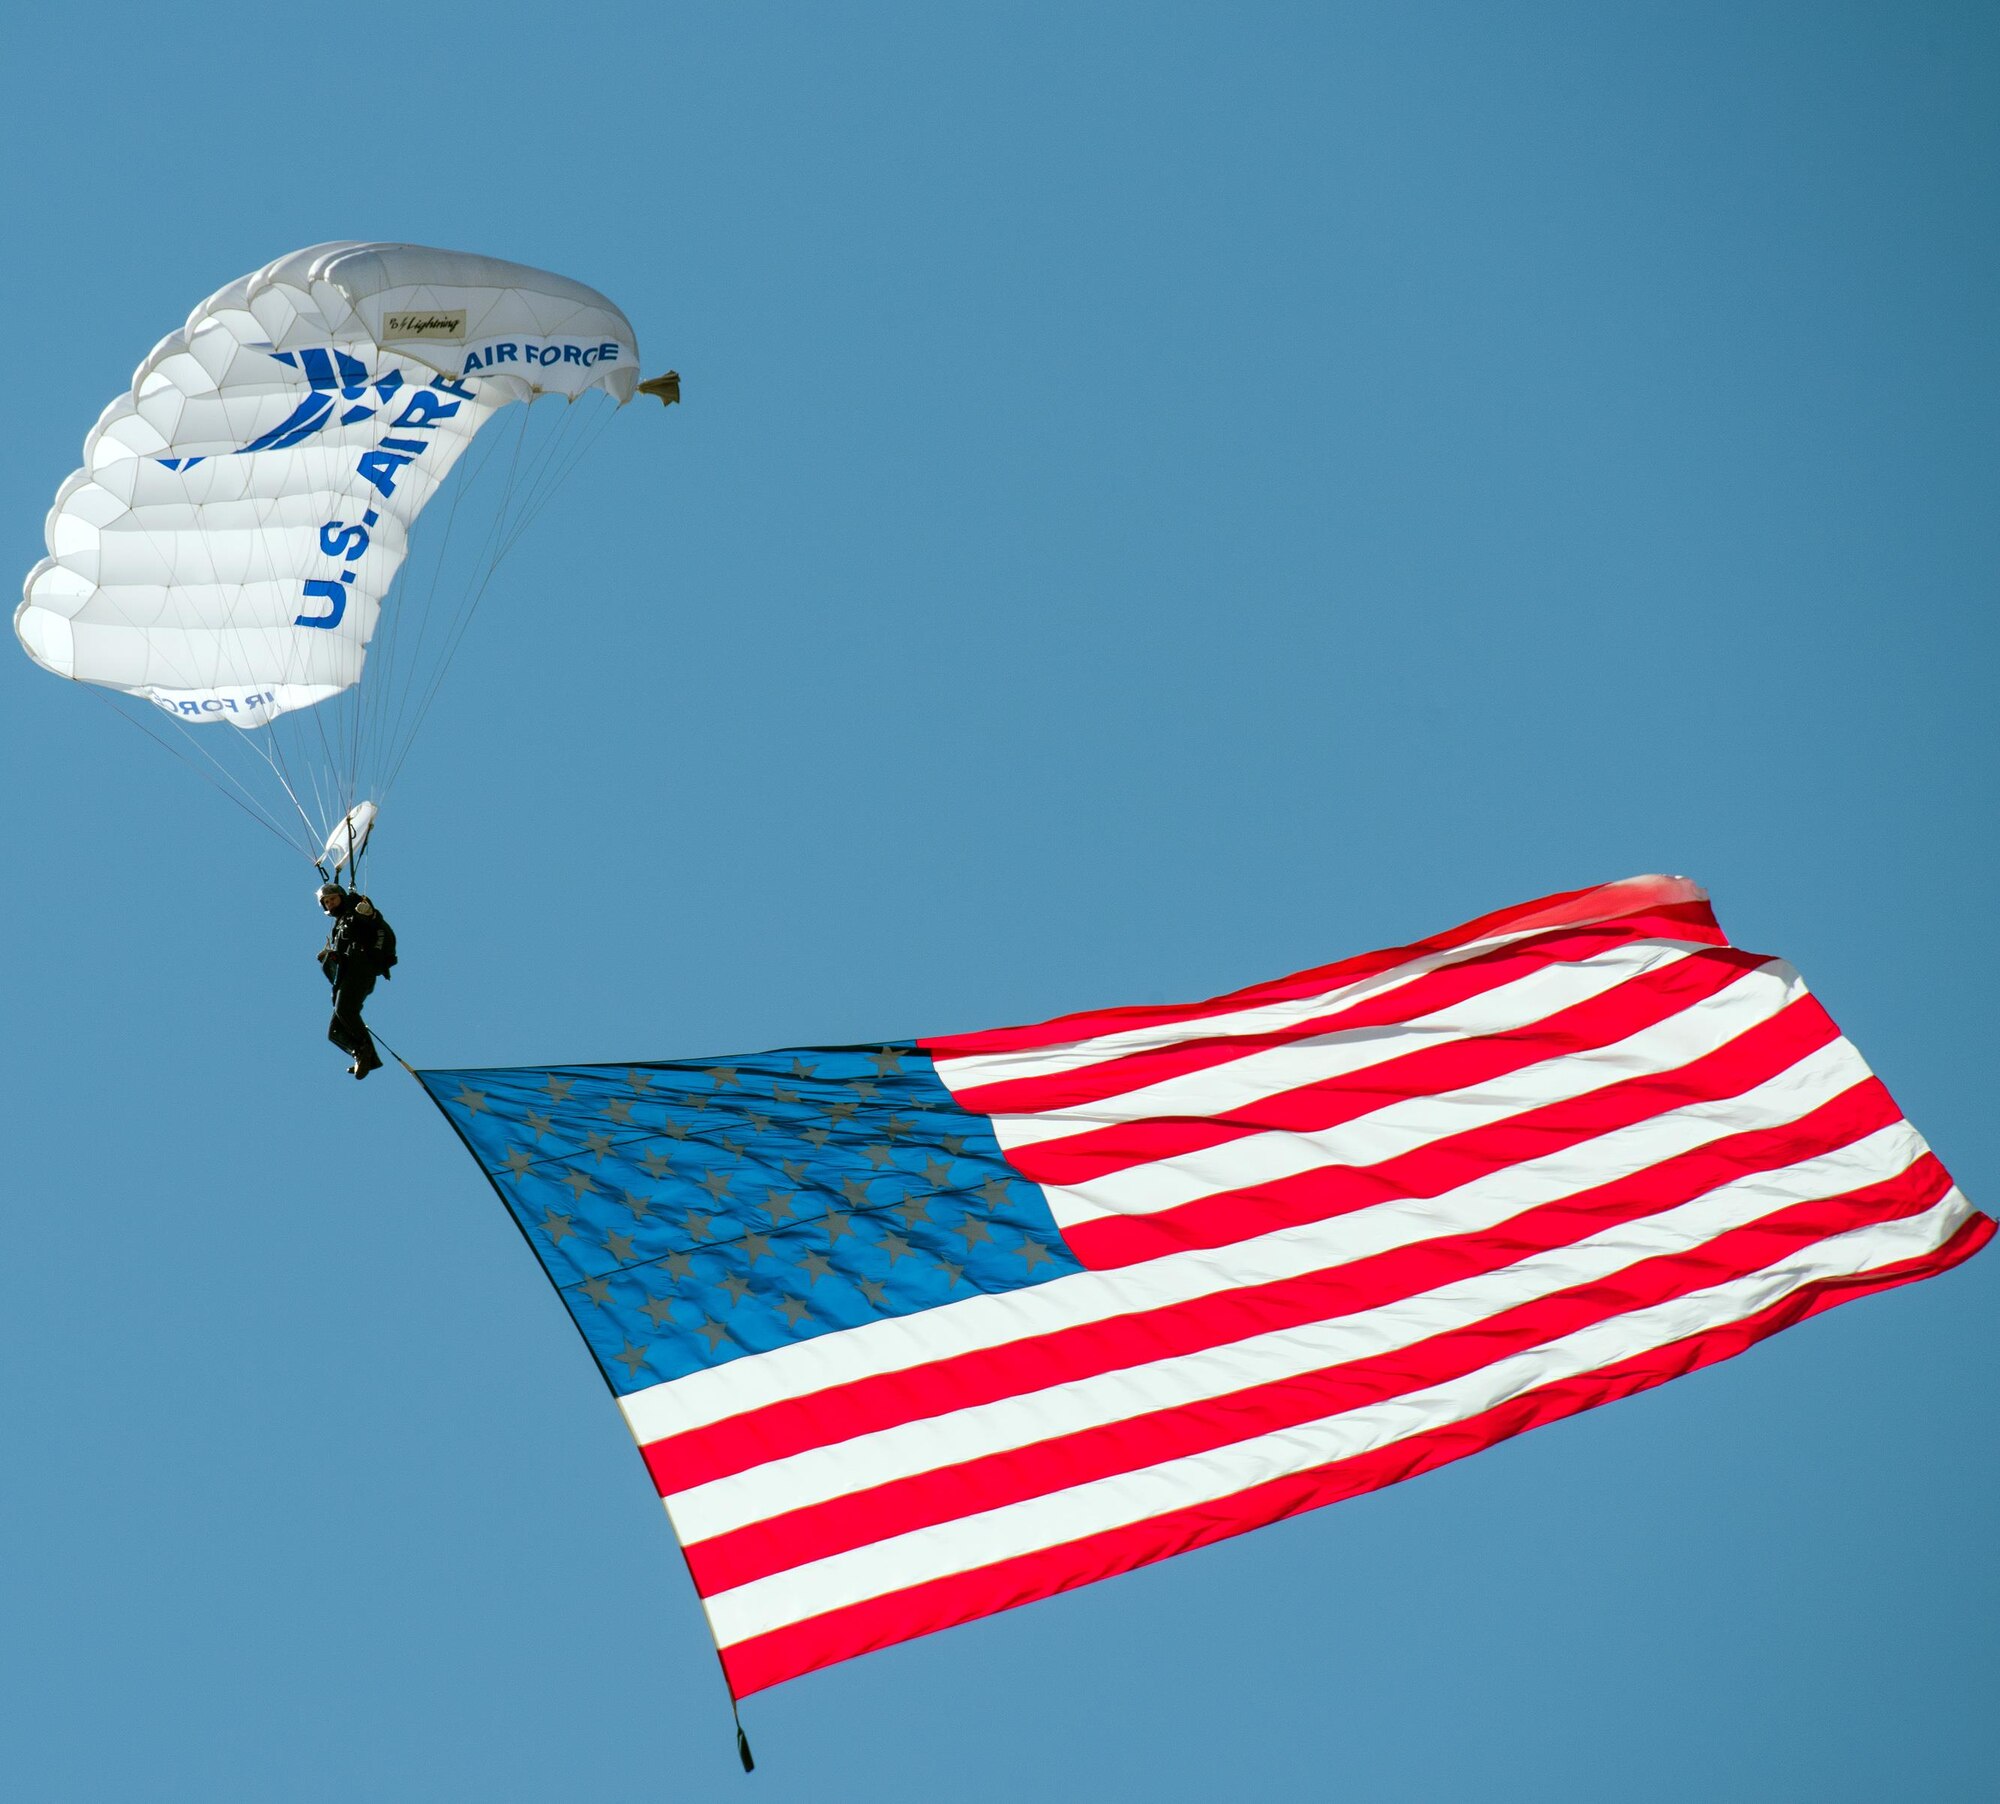 A member of the U.S. Air Force Academy Wings of Blue delivers the American flag during the Wings Over Solano Air Show at Travis Air Force Base, Calif., May 6, 2017. The two-day event featured performances by the U.S. Air Force Thunderbirds aerial demonstration team, flyovers and static displays. (U.S. Air Force photo by Louis Briscese)